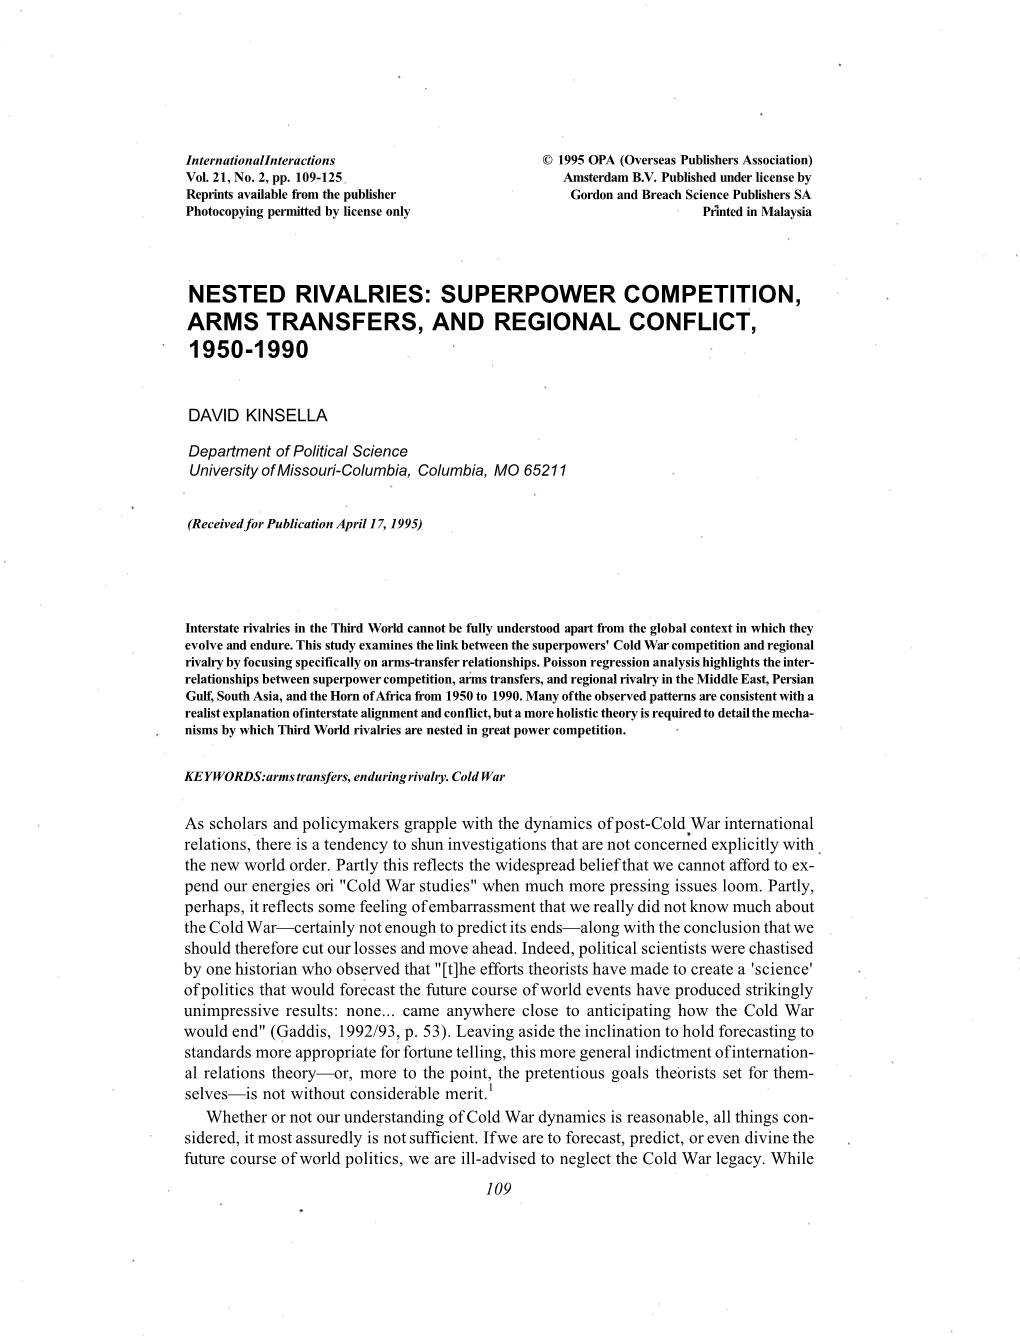 Nested Rivalries: Superpower Competition, Arms Transfers, and Regional Conflict, 1950-1990